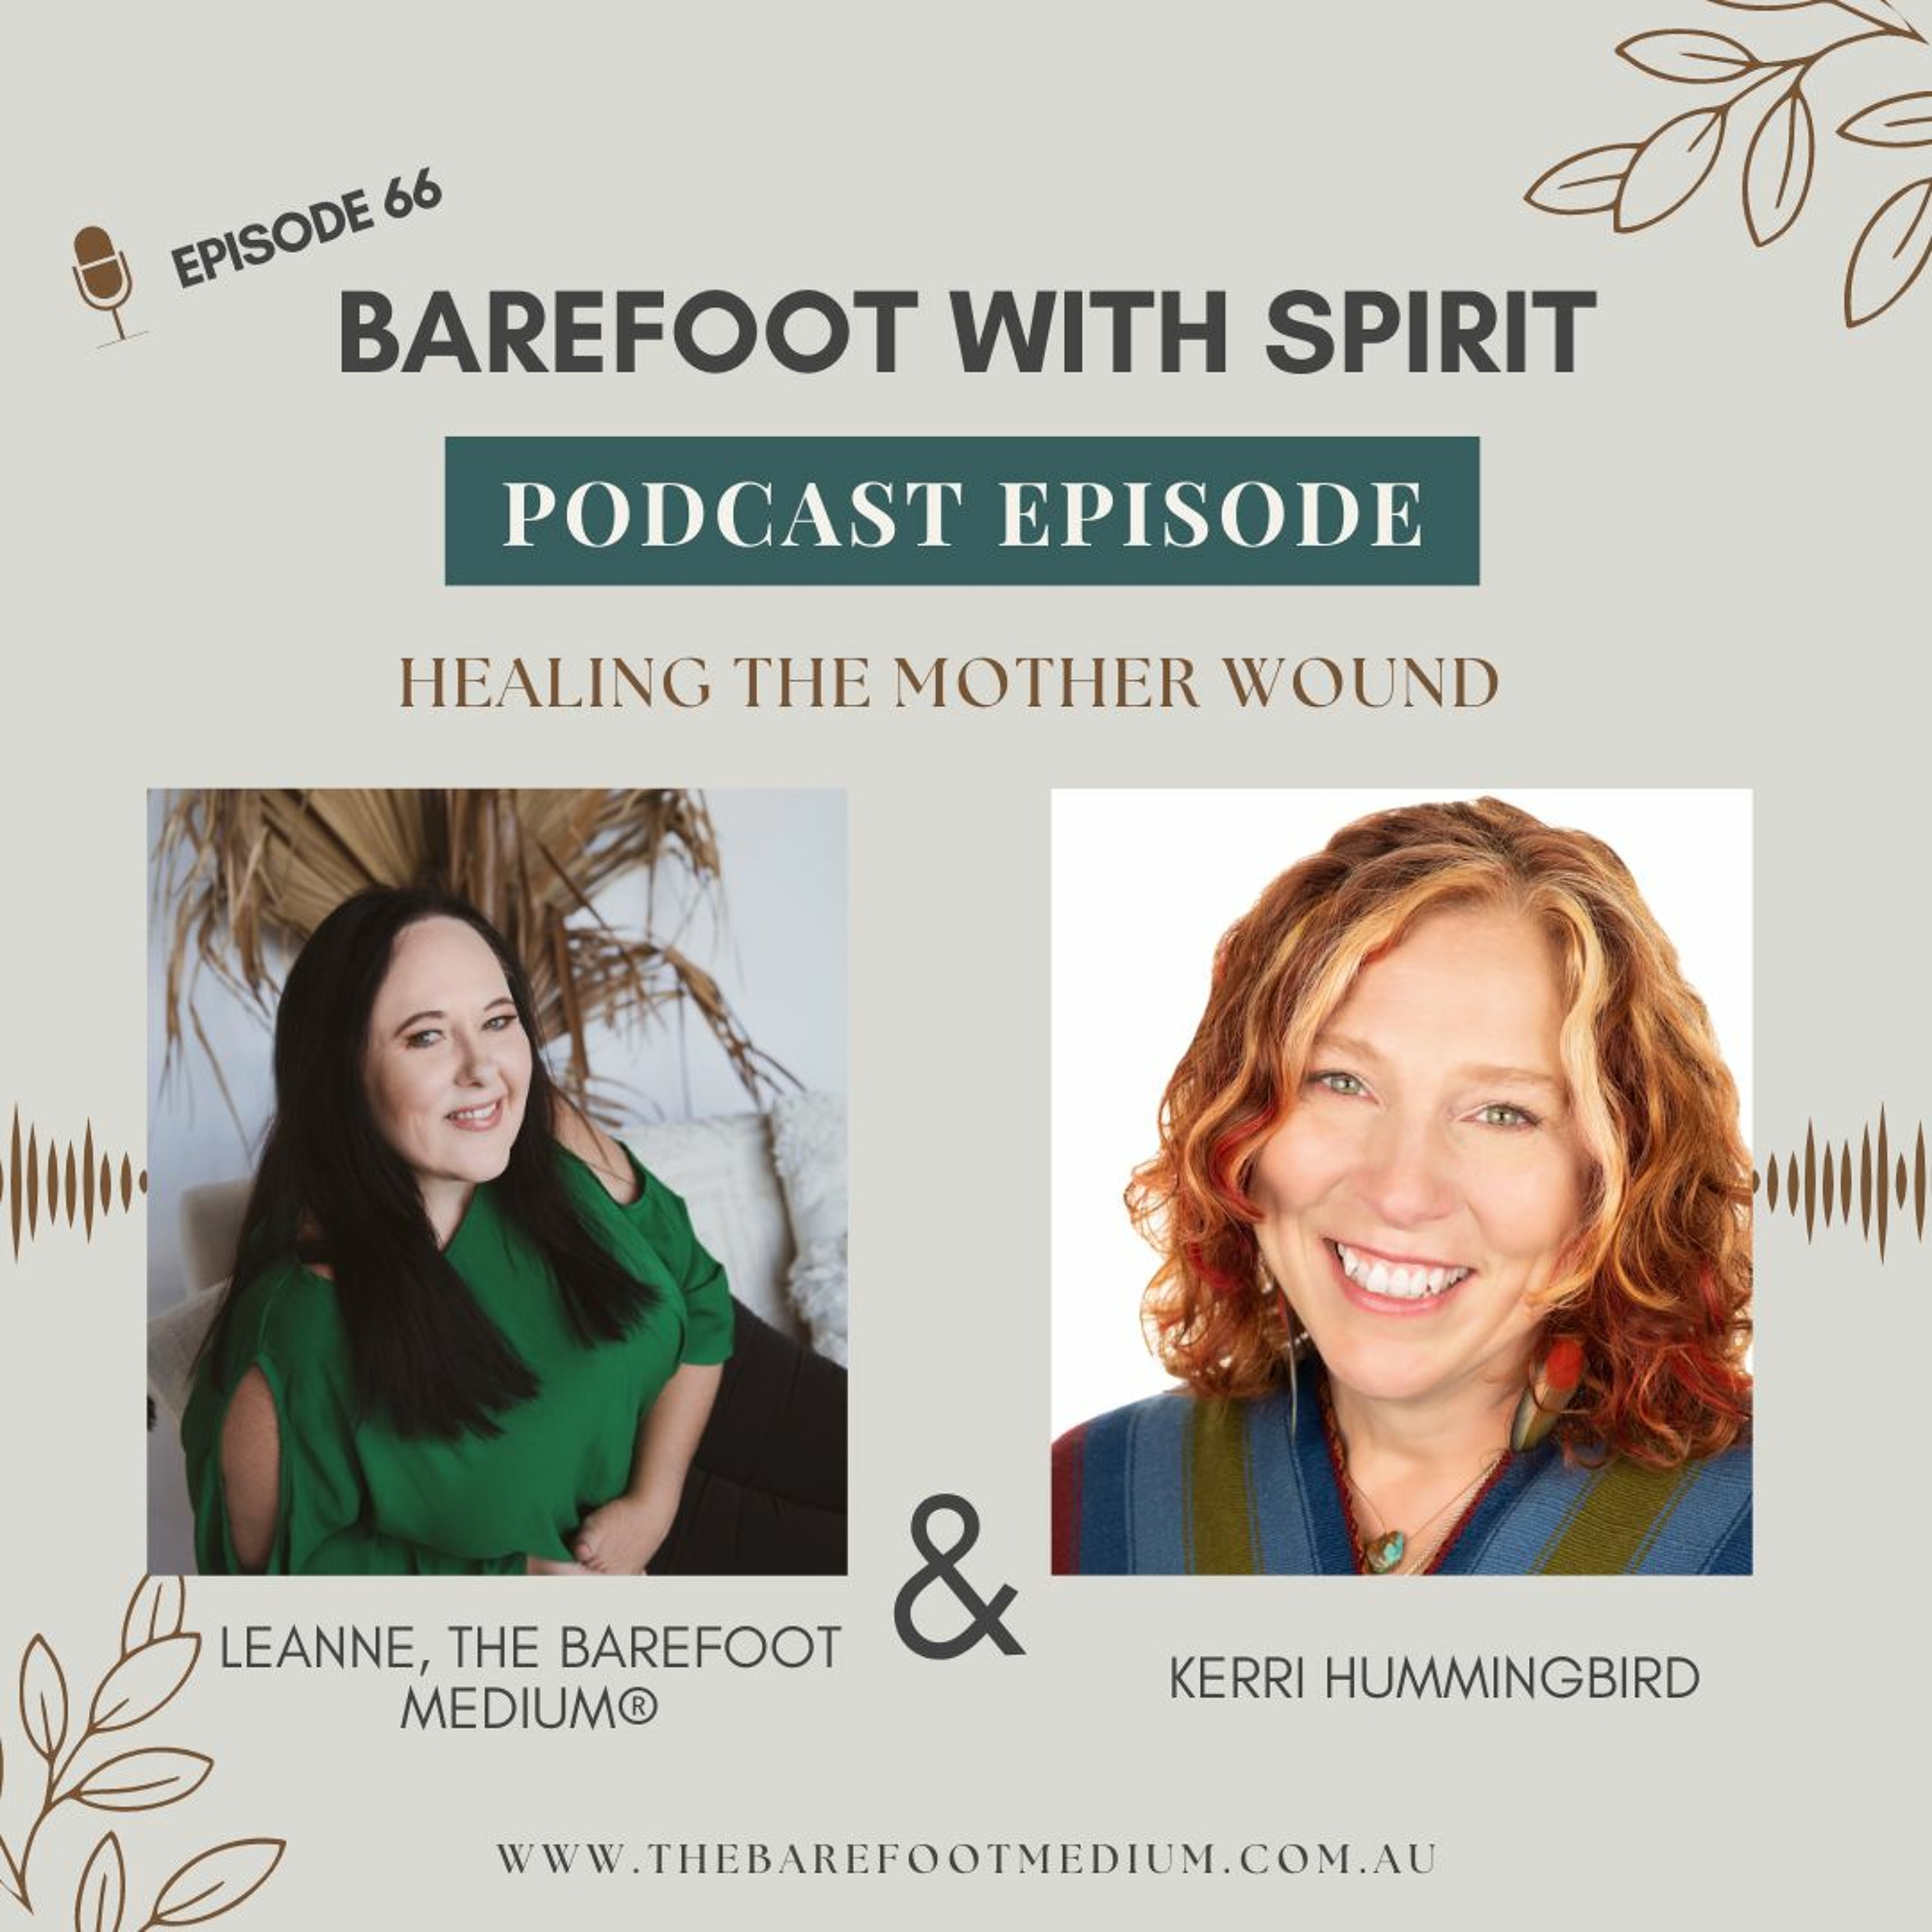 Barefoot Podcast:  Healing the Mother Wound (Ep 66)